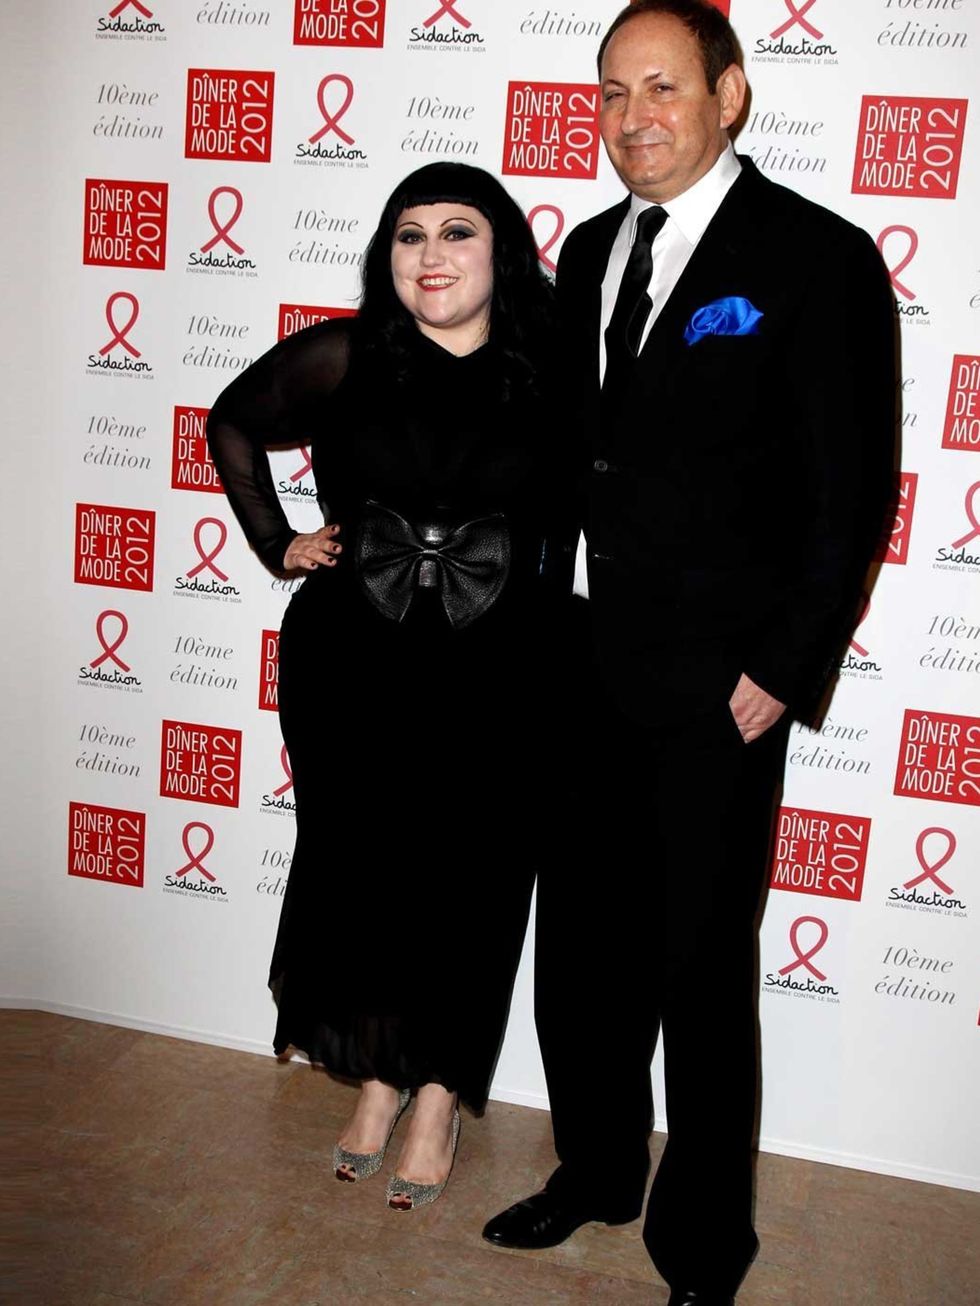 <p>Beth Ditto and John Demsey at the Gala Sidaction Dîner de la mode in Paris</p>